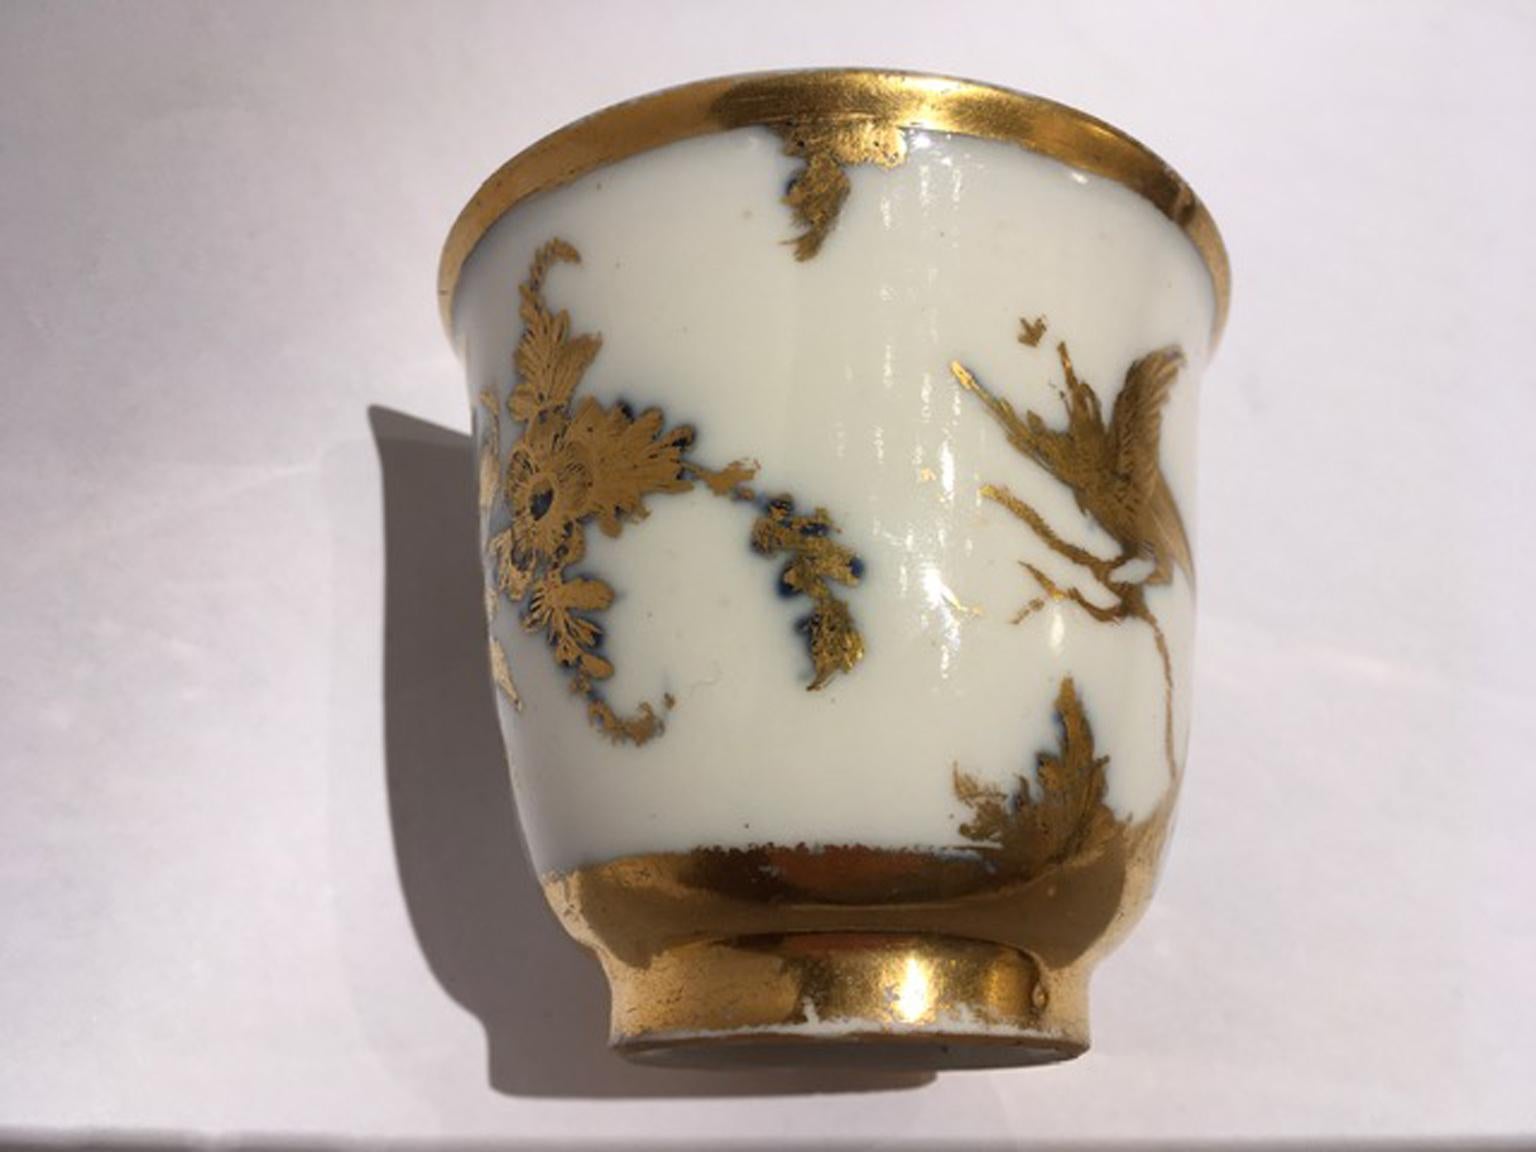 This is a small masterpiece of craftsmanship: the fine porcelain is designed in gold with floral and natural scenes, rich in detail.
A piece for refined collectors or useful to start a collection

Marked on the back.
With certificate of